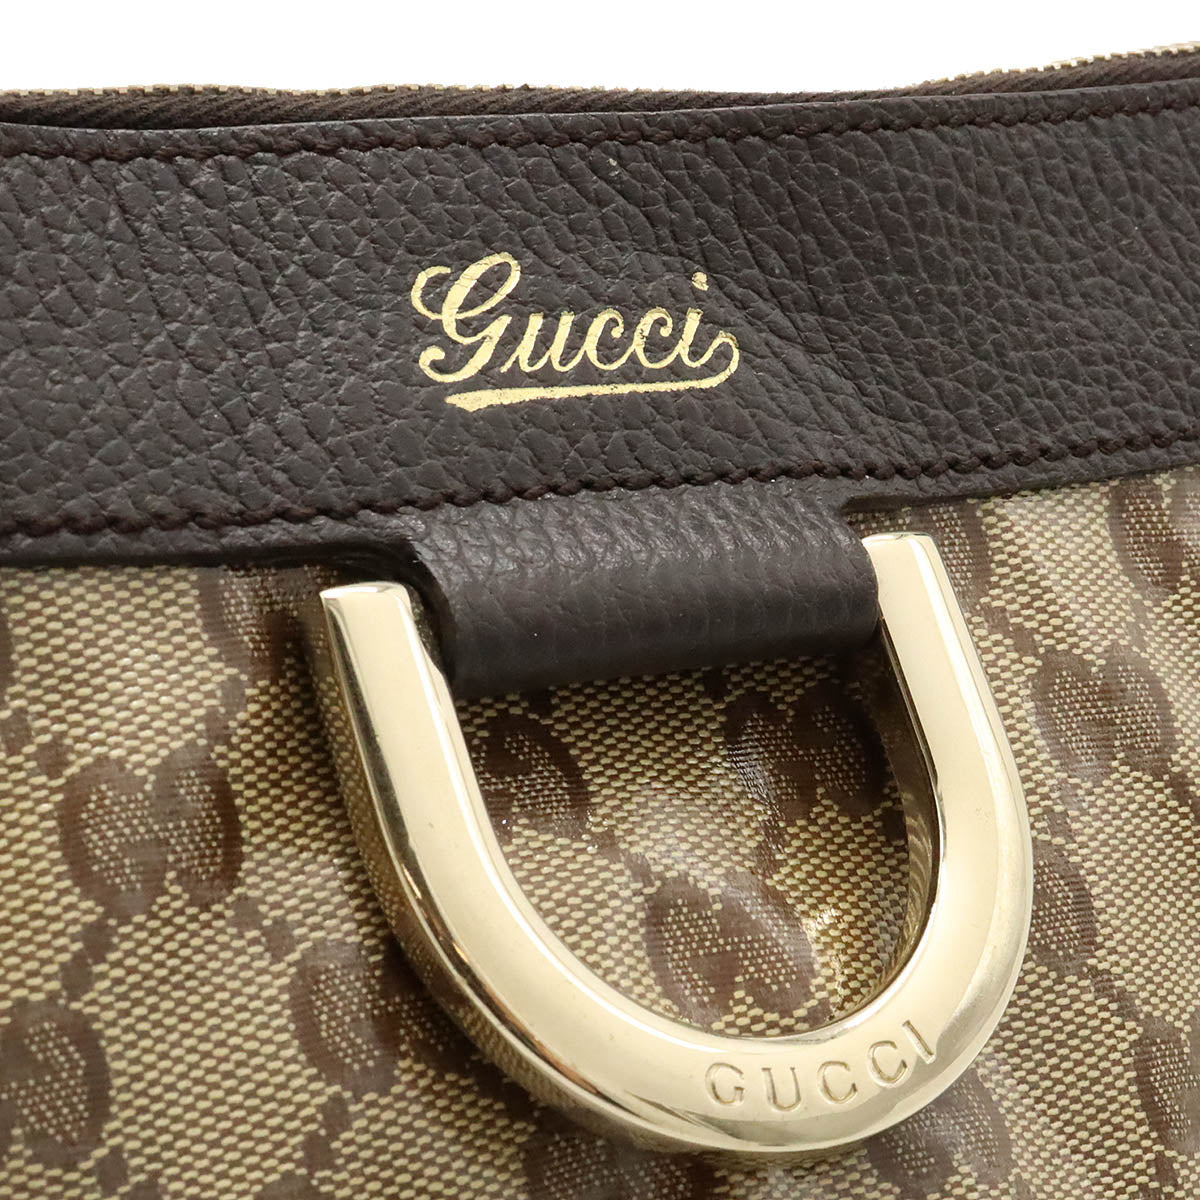 Gucci Gucci Abby GG Crystal Shoulder Bag Coated Canvas Leather Beige Dark Brown Tea Outlet 265691